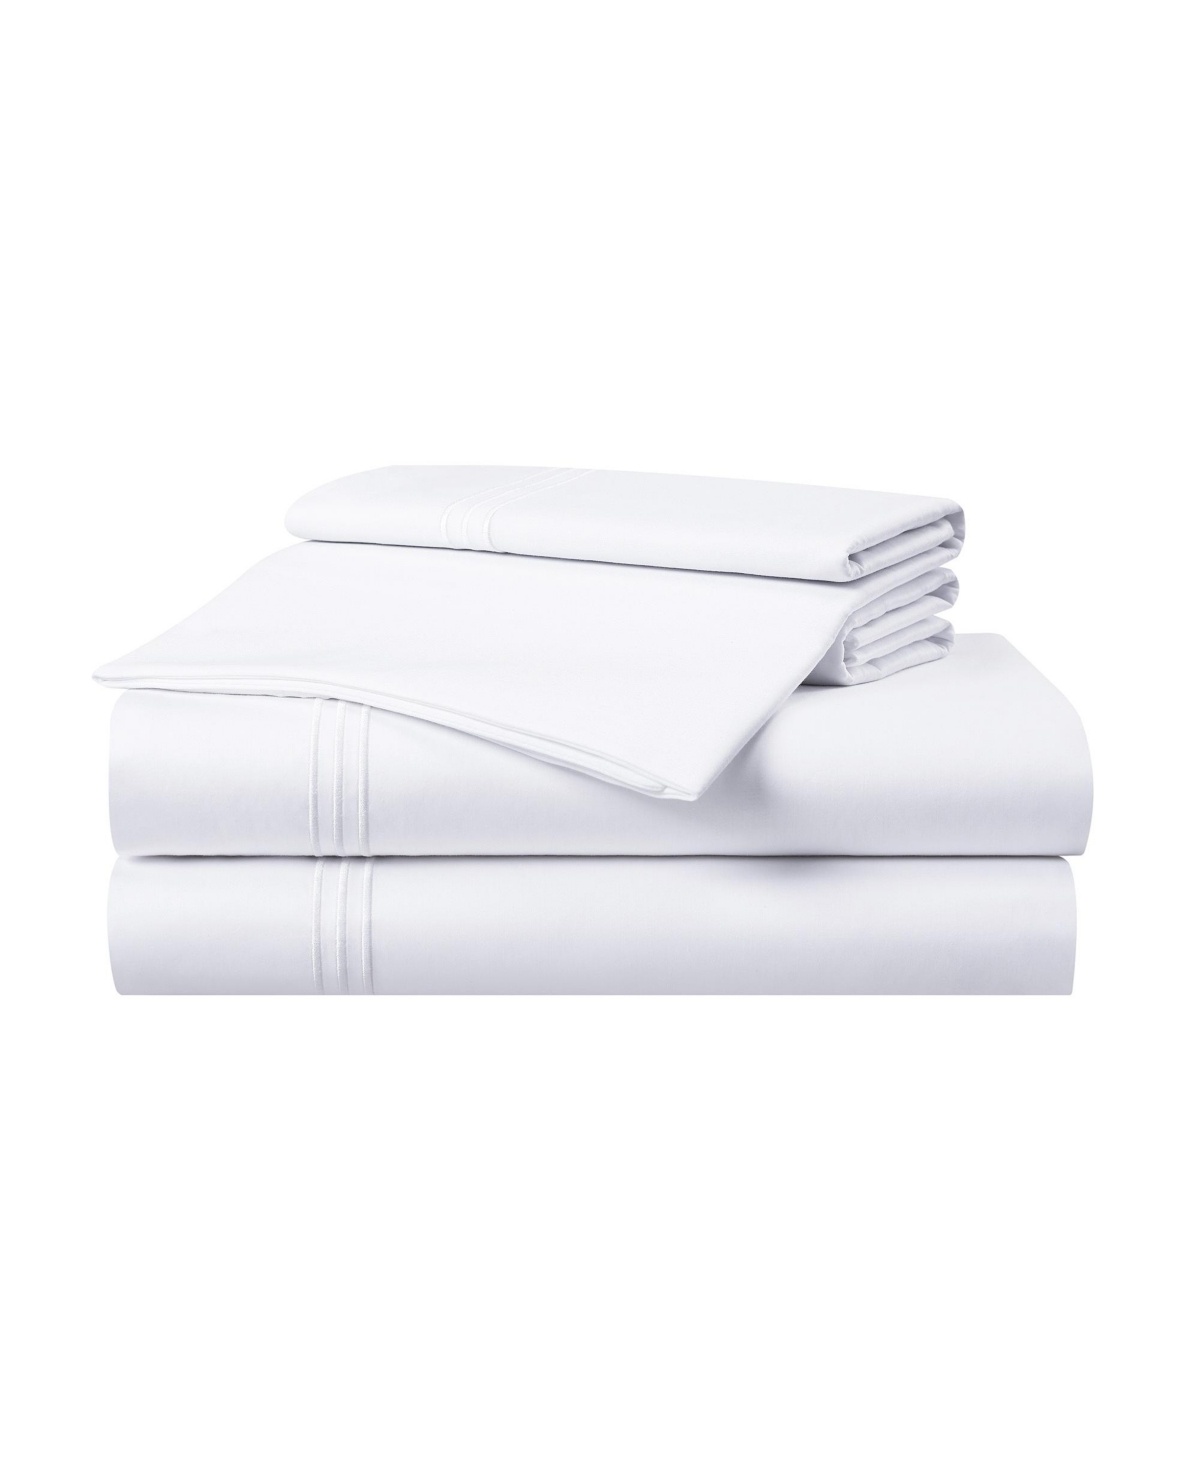 Aston And Arden Sateen Full Sheet Set, 1 Flat Sheet, 1 Fitted Sheet, 2 Pillowcases, 600 Thread Count In White